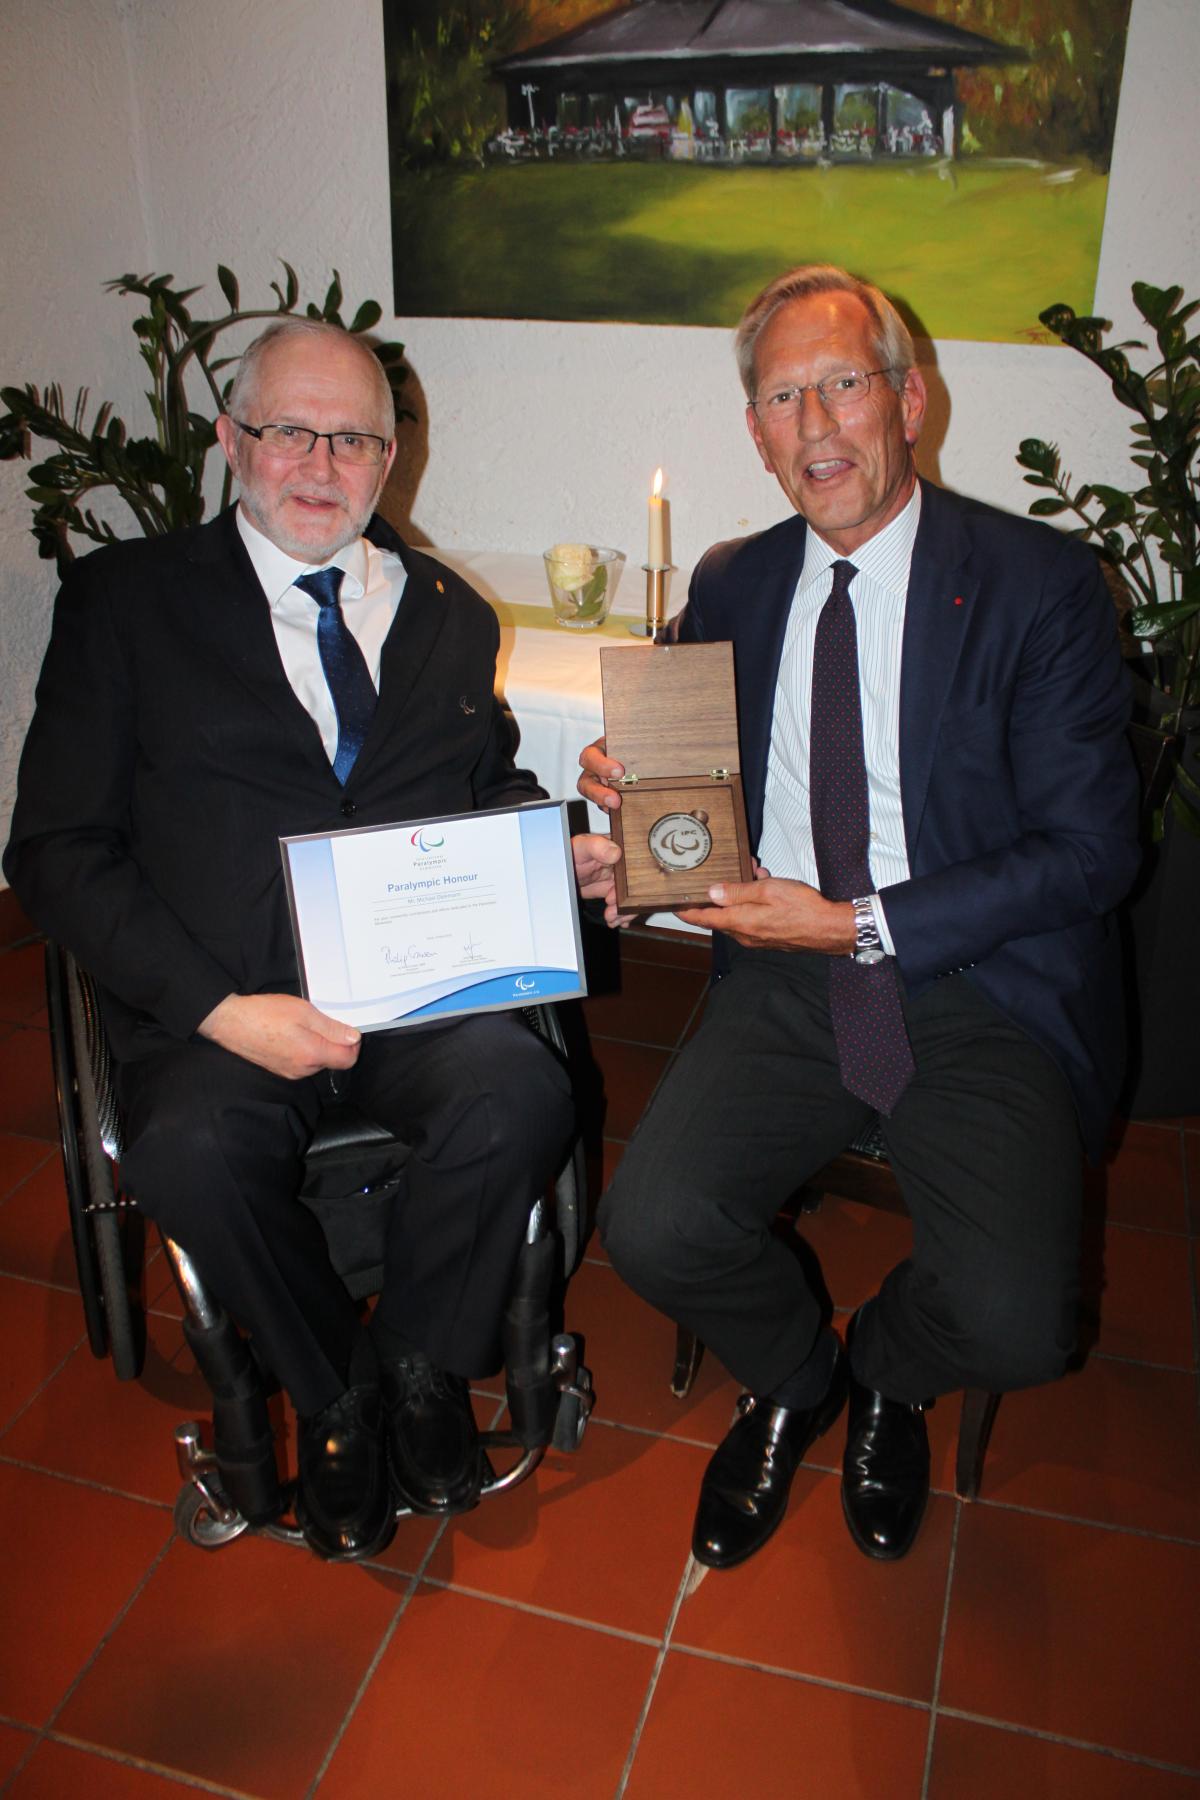 The former CEO of Allianz, Michael Diekmann, receives the Paralympic Honour from IPC President Sir Philip Craven on 15 April 2016.